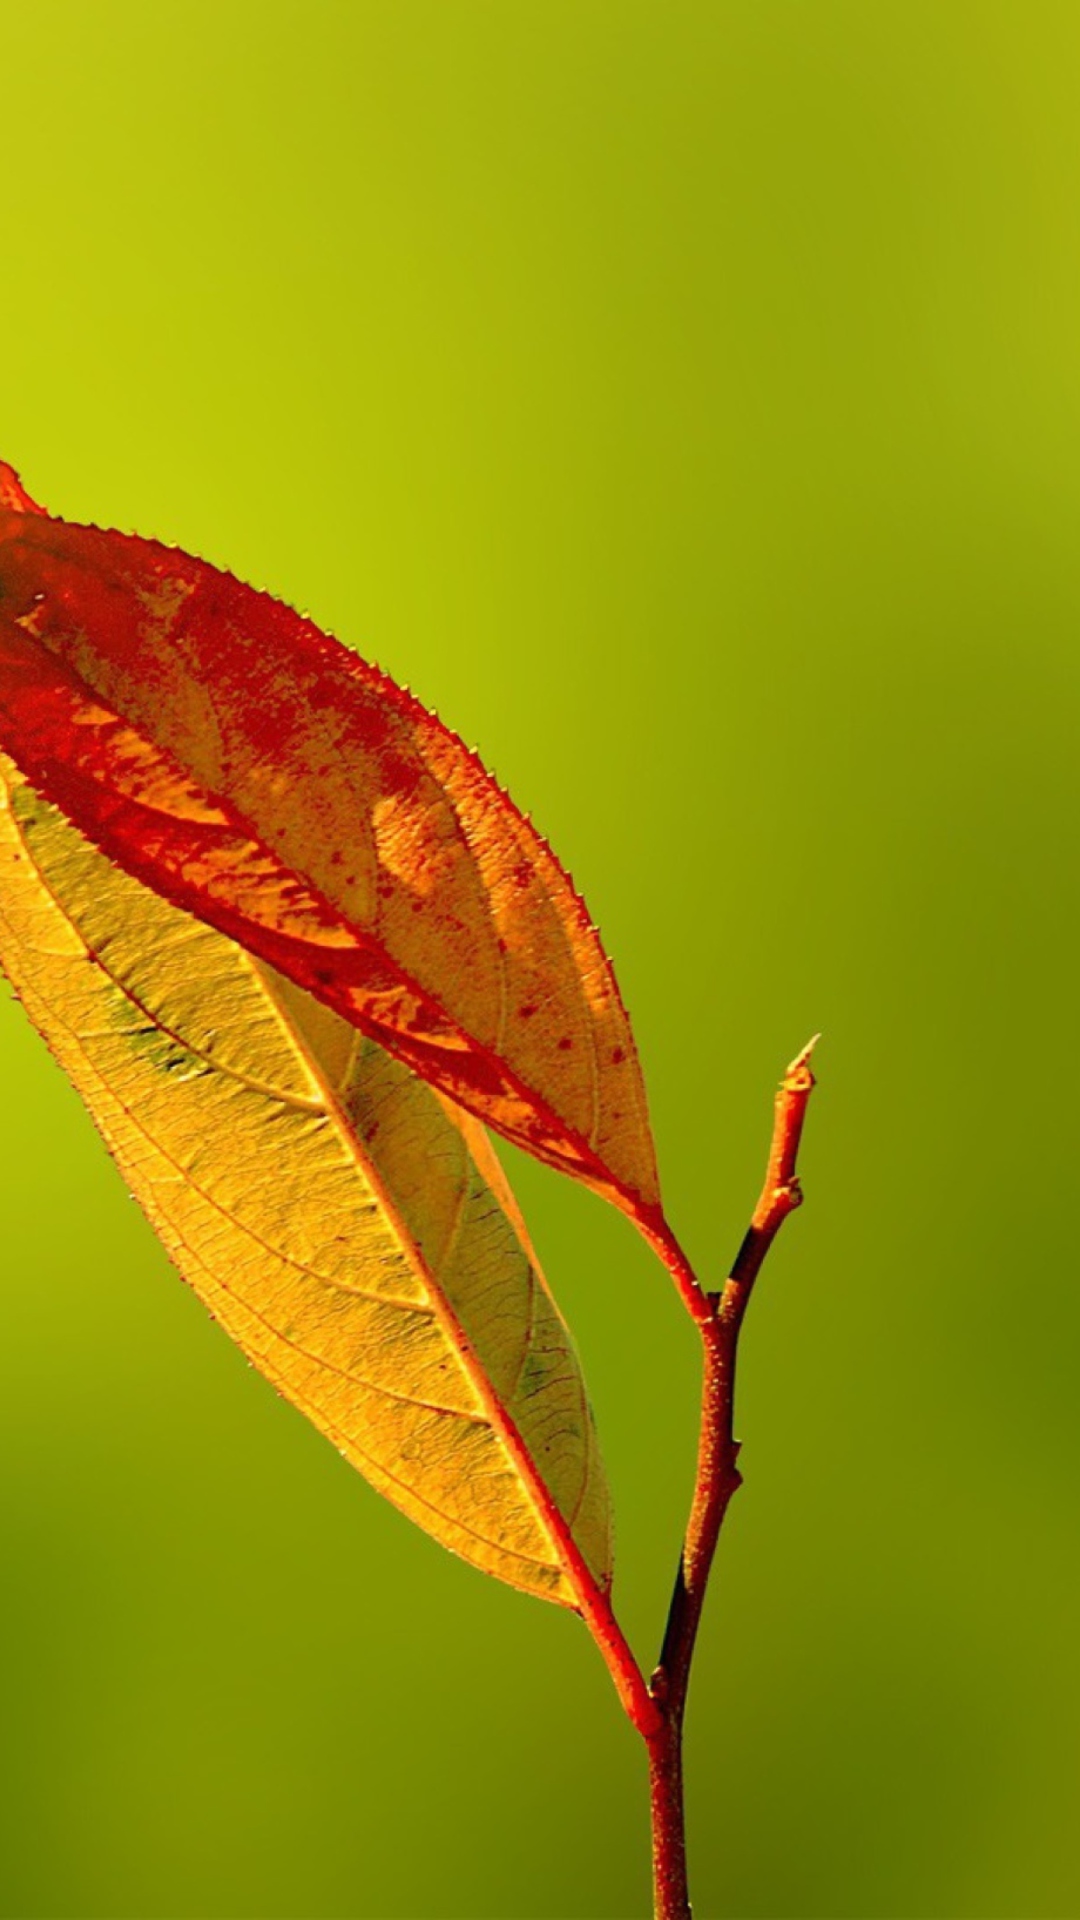 Red And Yellow Leaves On Green wallpaper 1080x1920